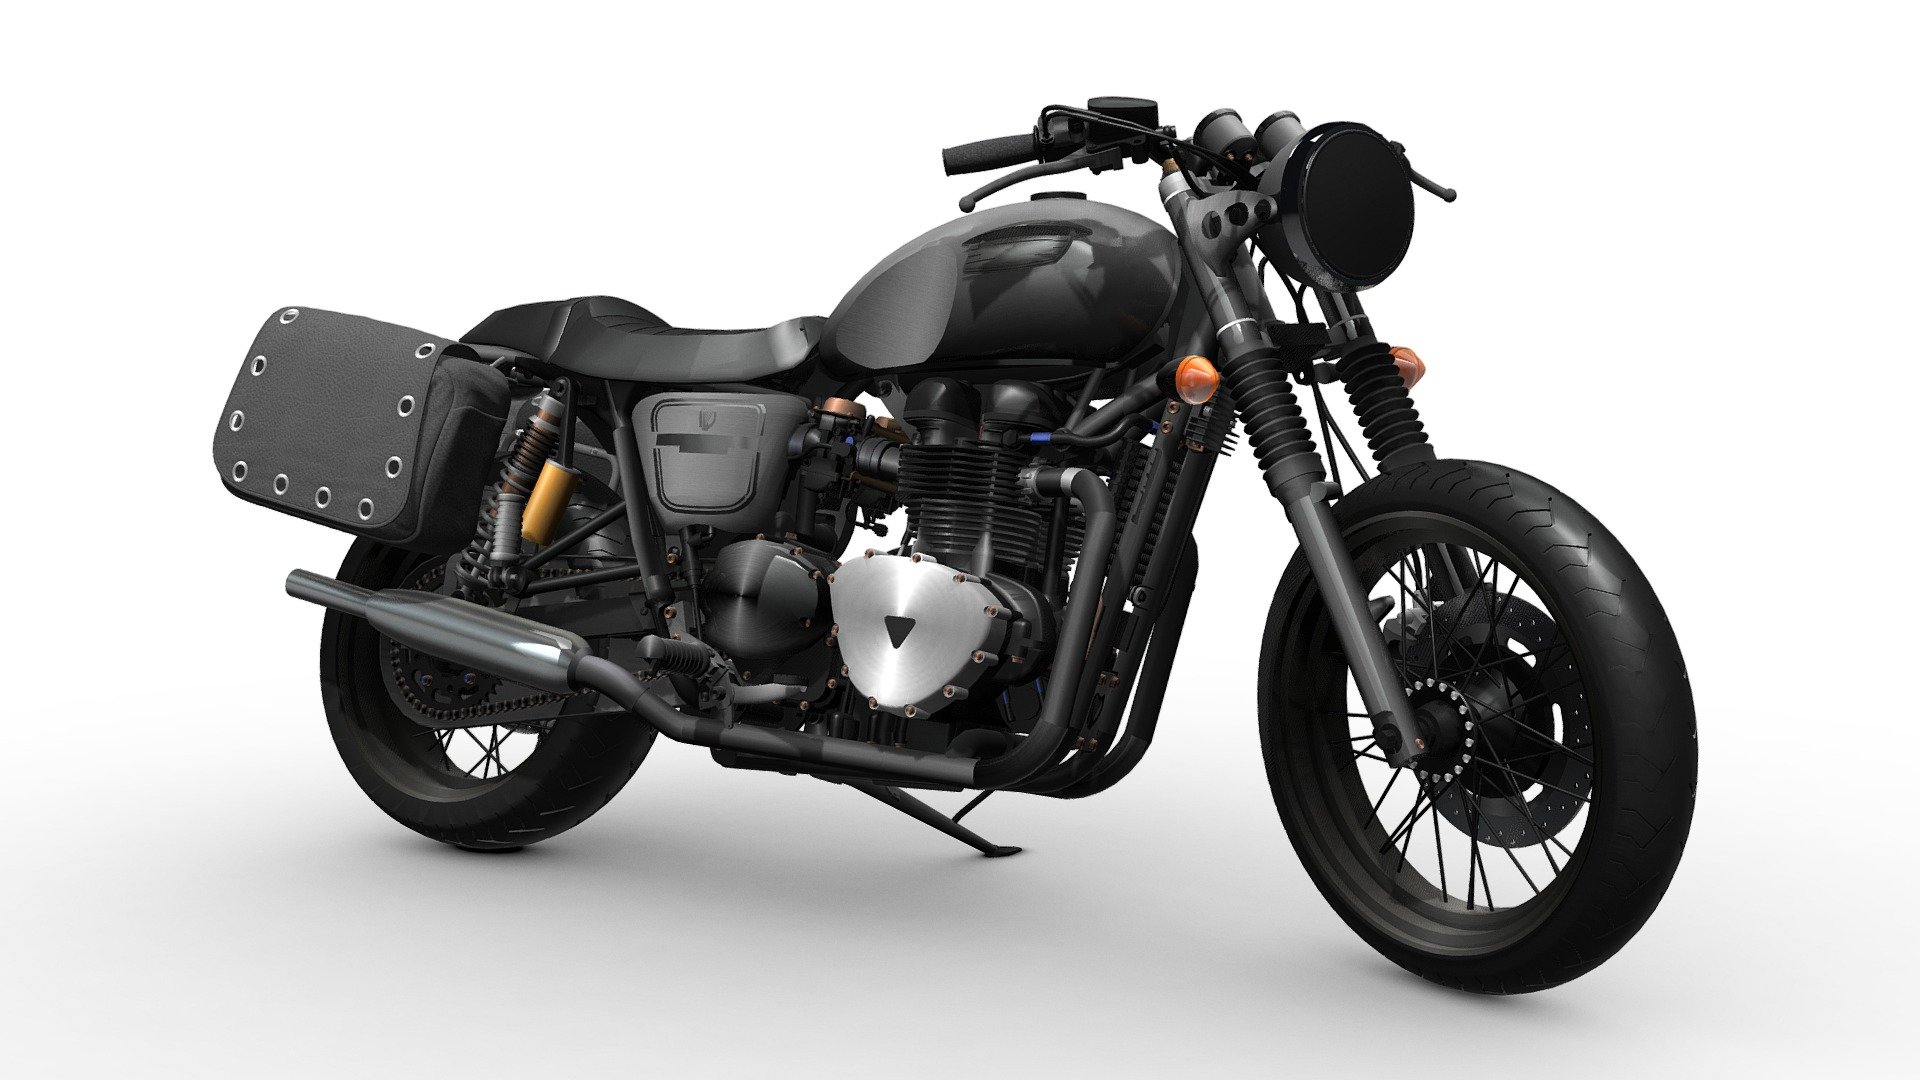 Could you please consider liking and subscribing to my account. Your support would mean a lot to me. Thank you! - 3d model Triumph Bonneville - Download Free 3D model by zizian 3d model